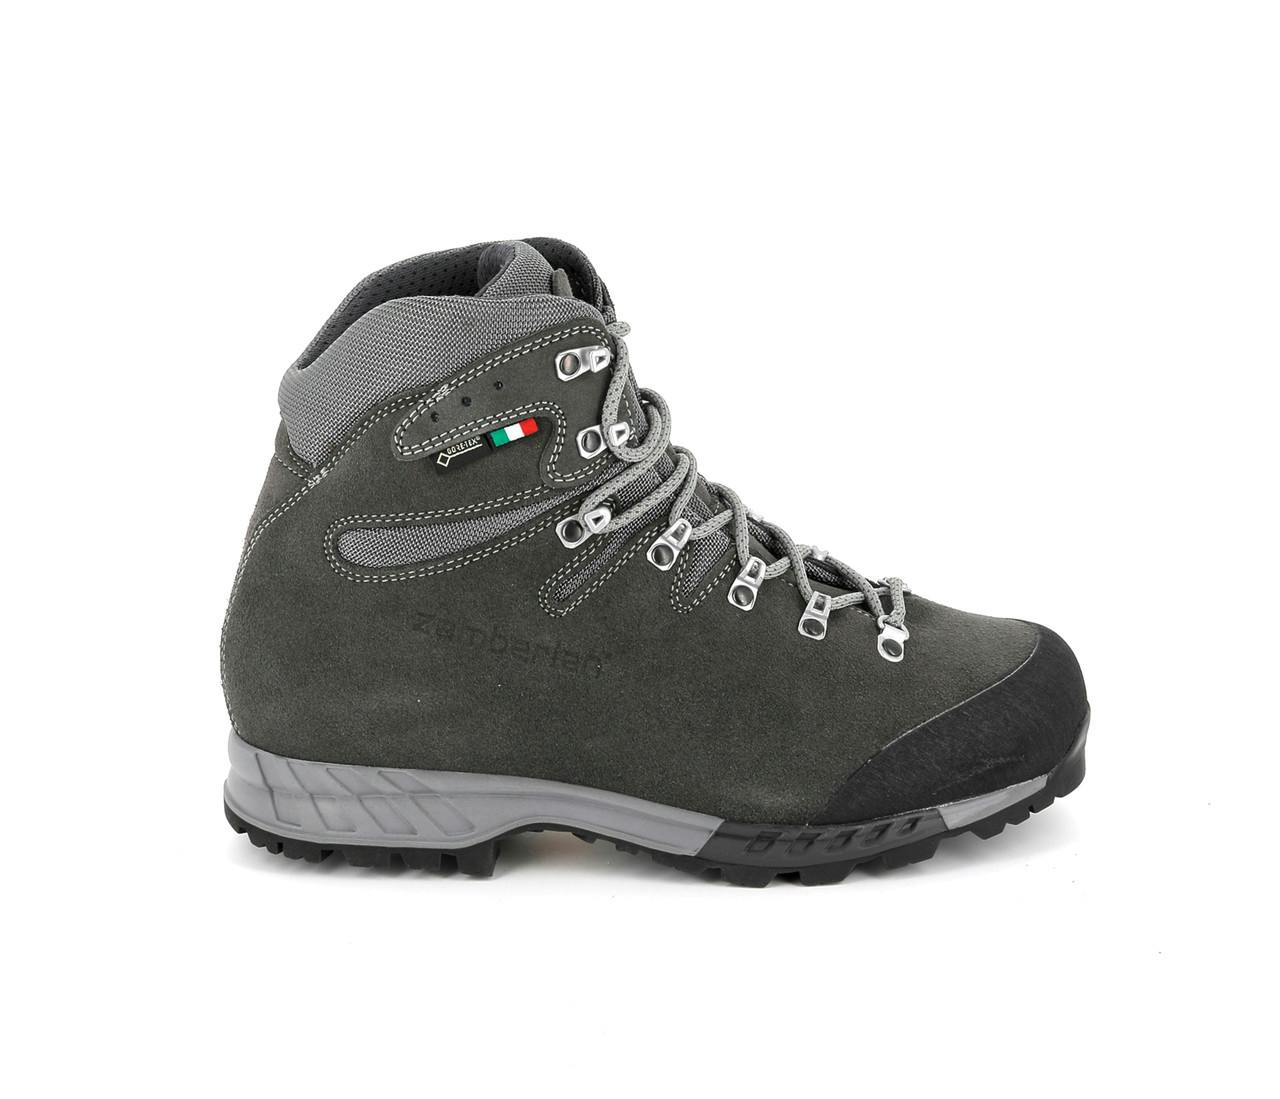 900 Rolle Evo 2 Gore-Tex Hiking Boots Grey